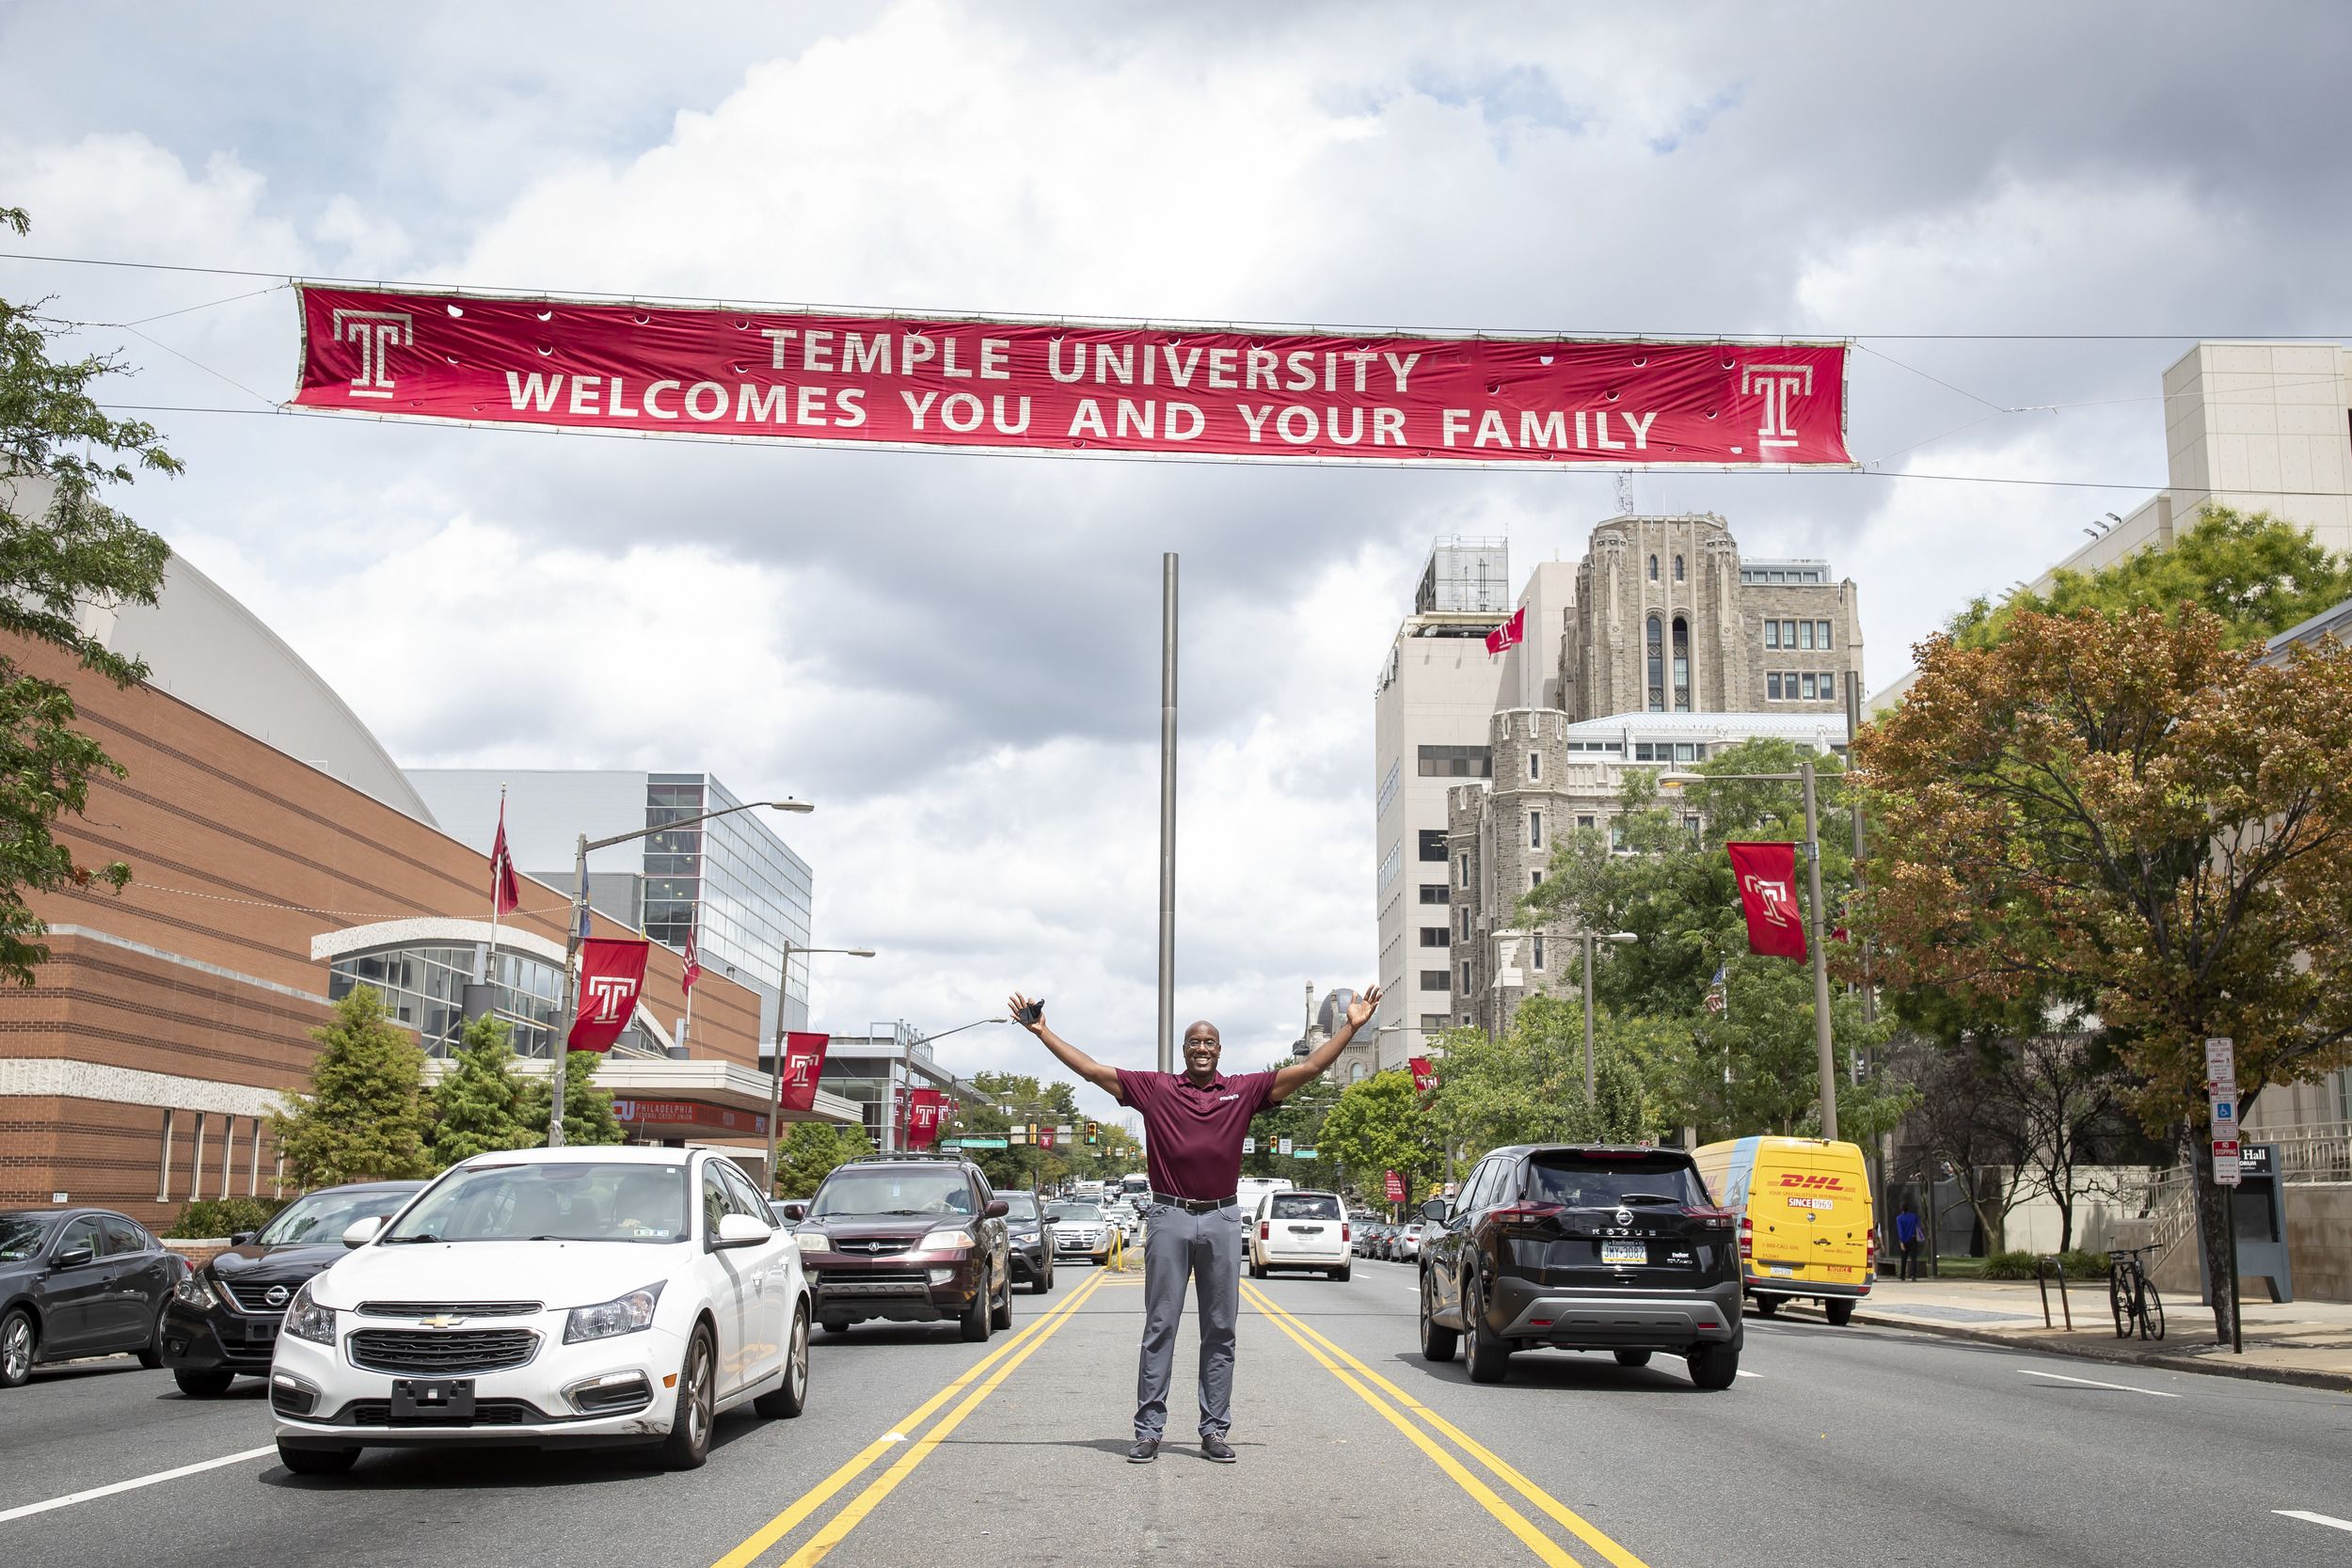 President Wingard welcomes families on Broad Street to Temple University.